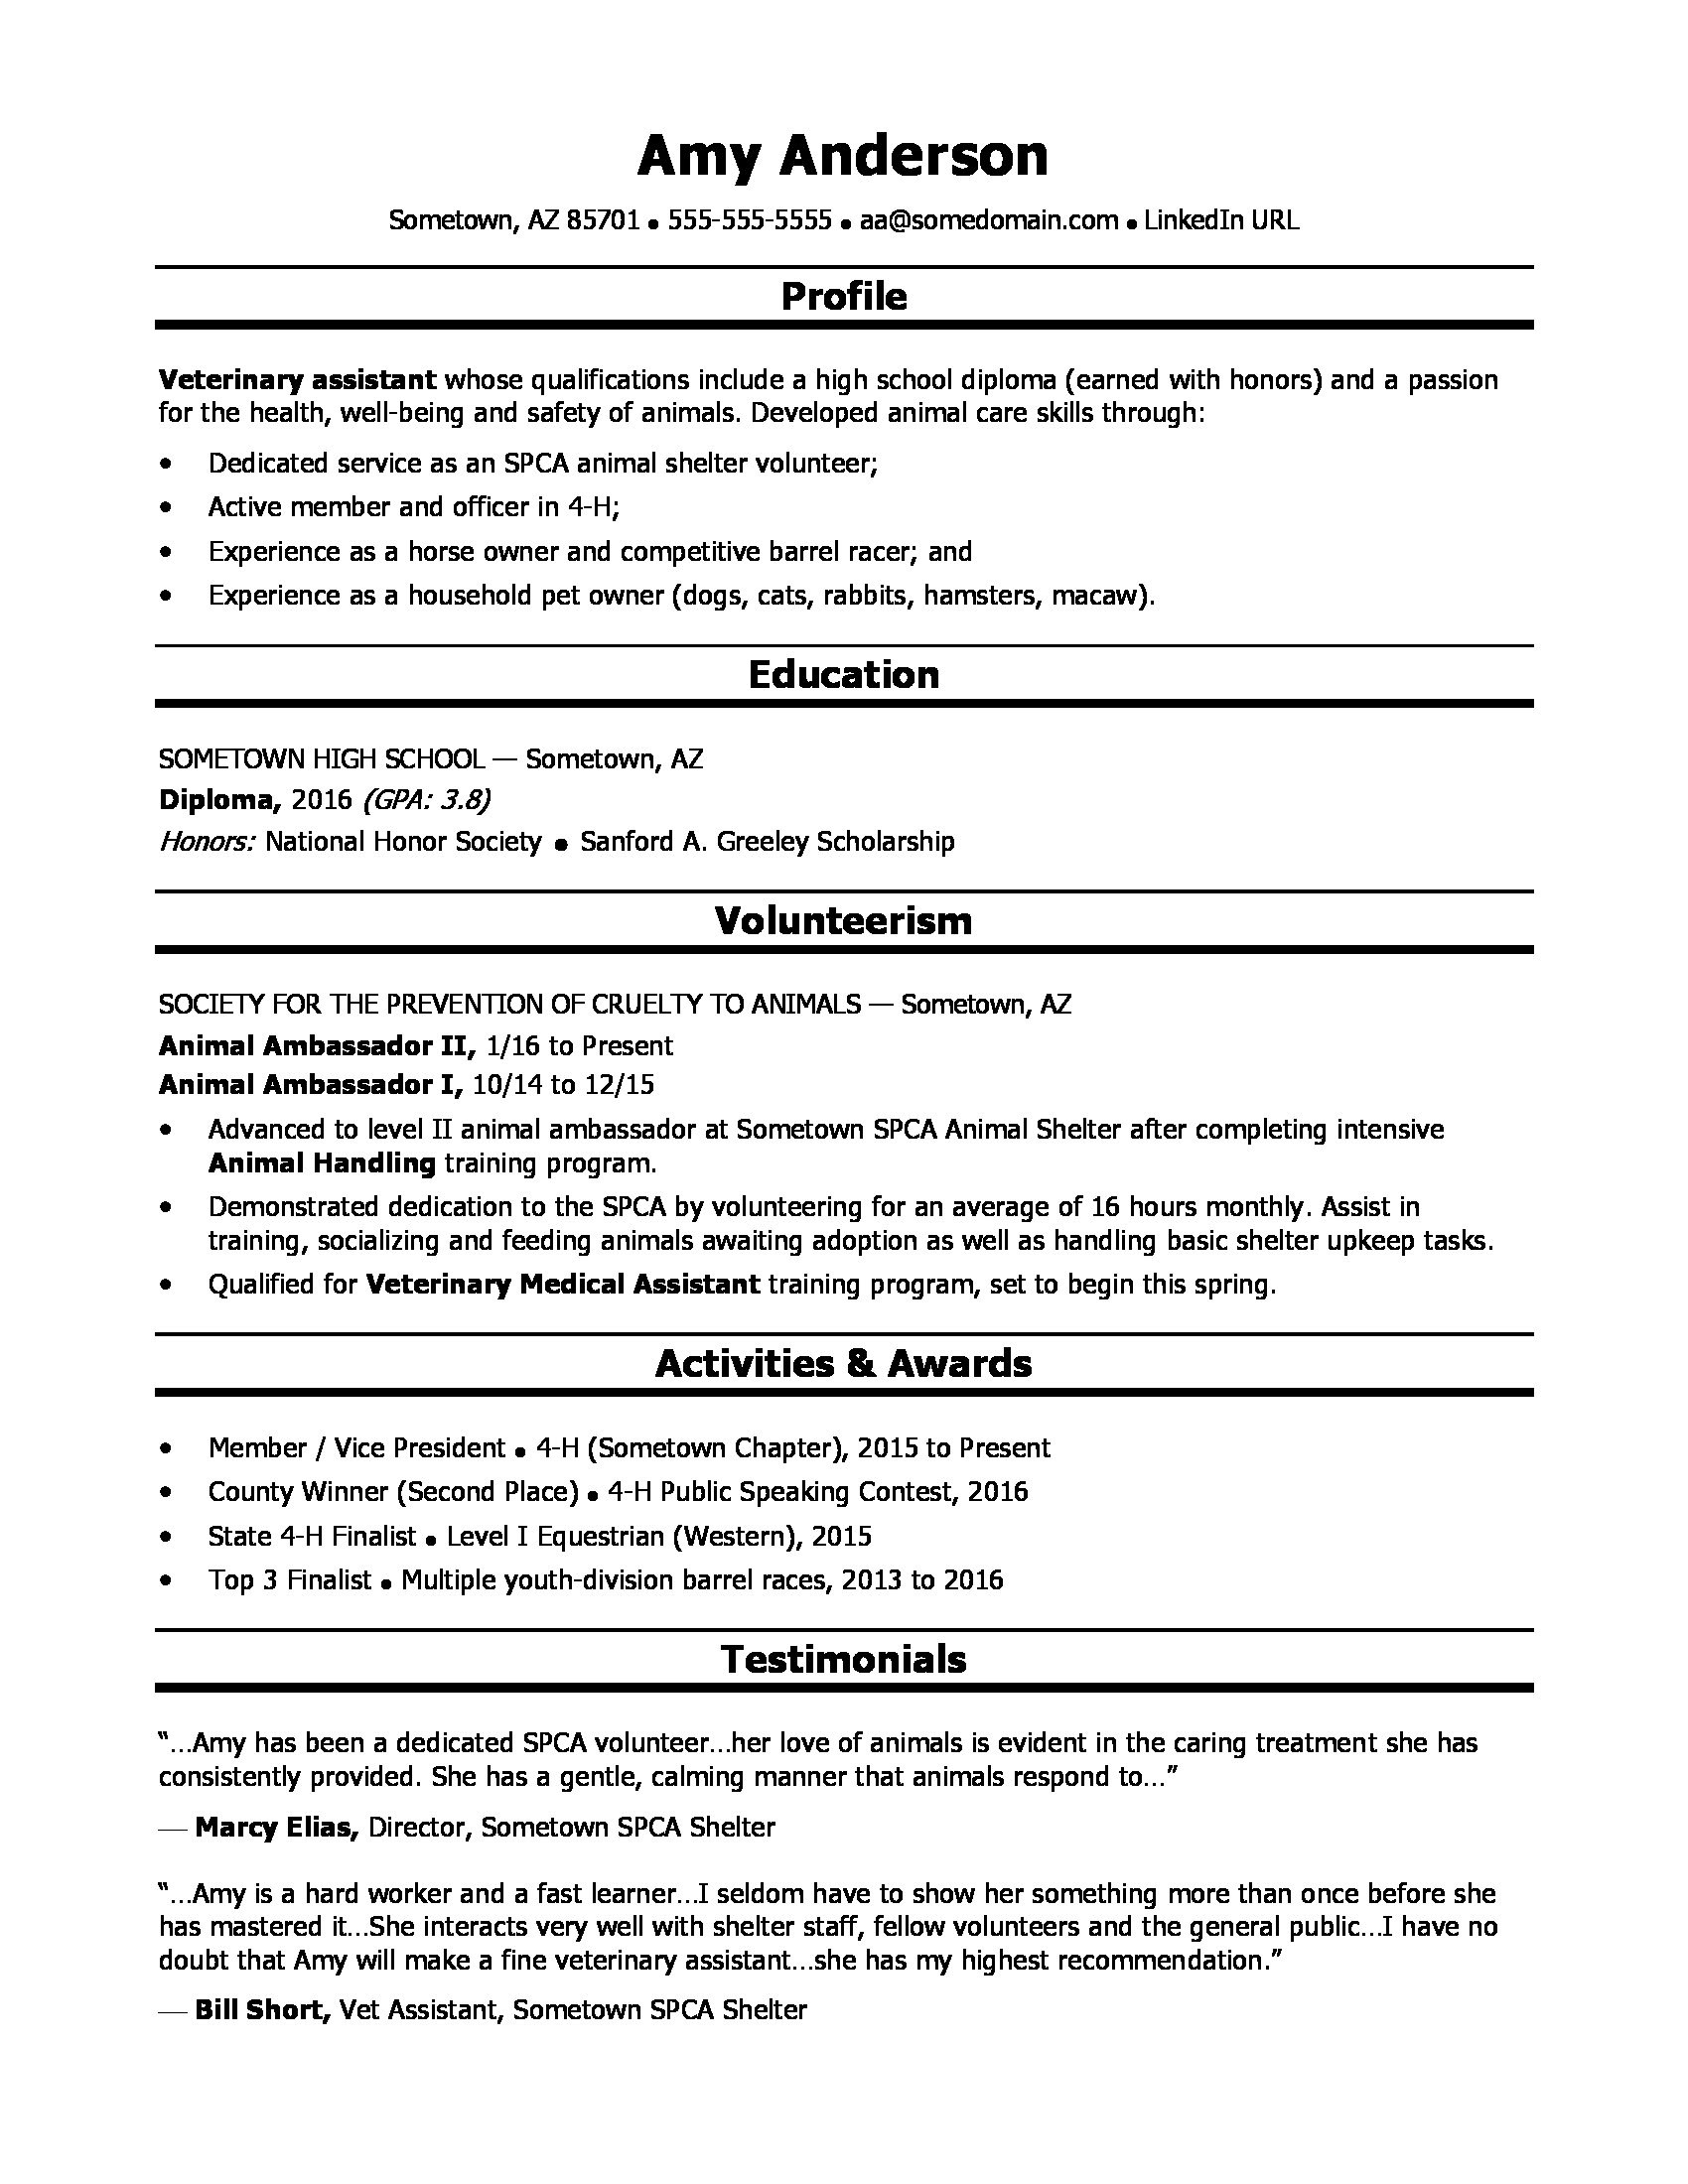 Received Numerous Accolades Sample for Resume High School Grad Resume Sample Monster.com